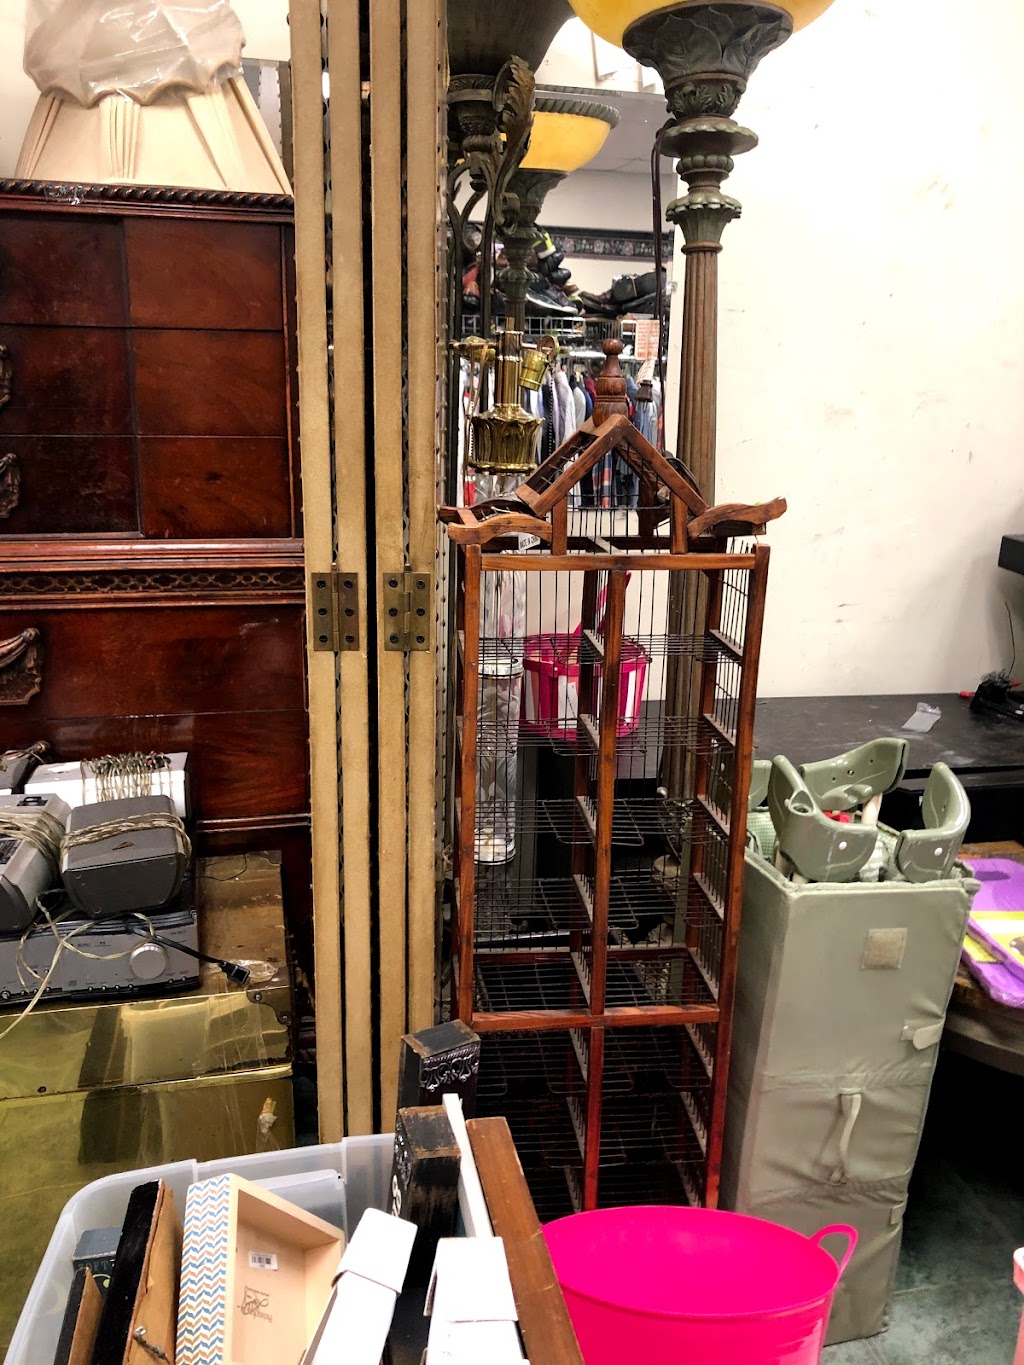 Odds and Ends Thrift Store North | 3255 Davie Blvd, Fort Lauderdale, FL 33312, USA | Phone: (954) 792-1445